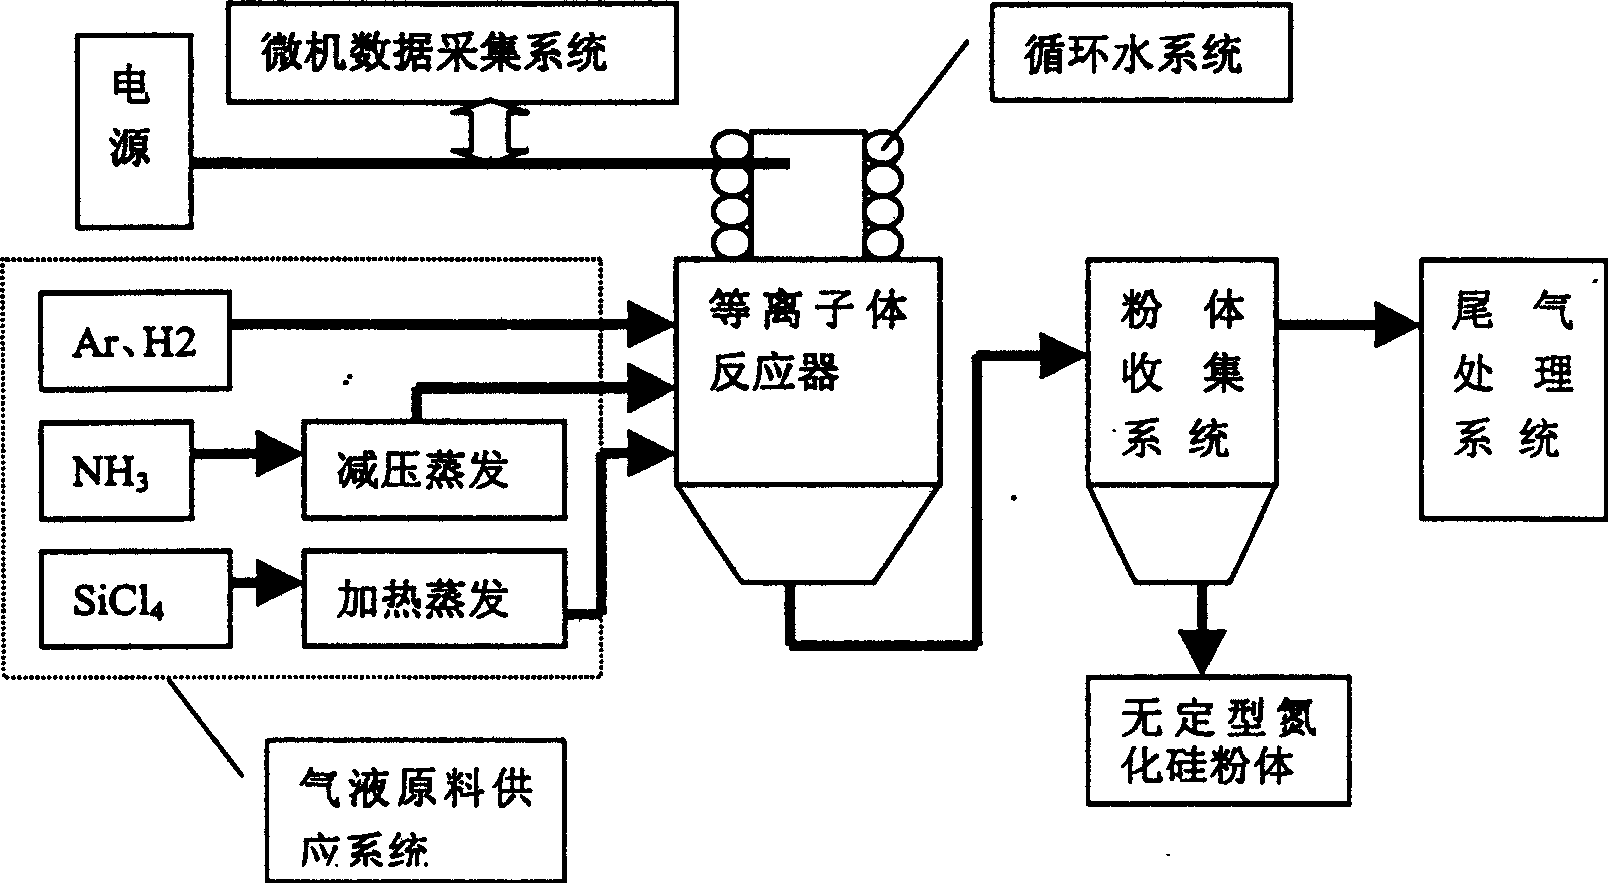 Phase transfer process and system for preparing silicon nitride powder in batches by gas-phase chemical plasma method